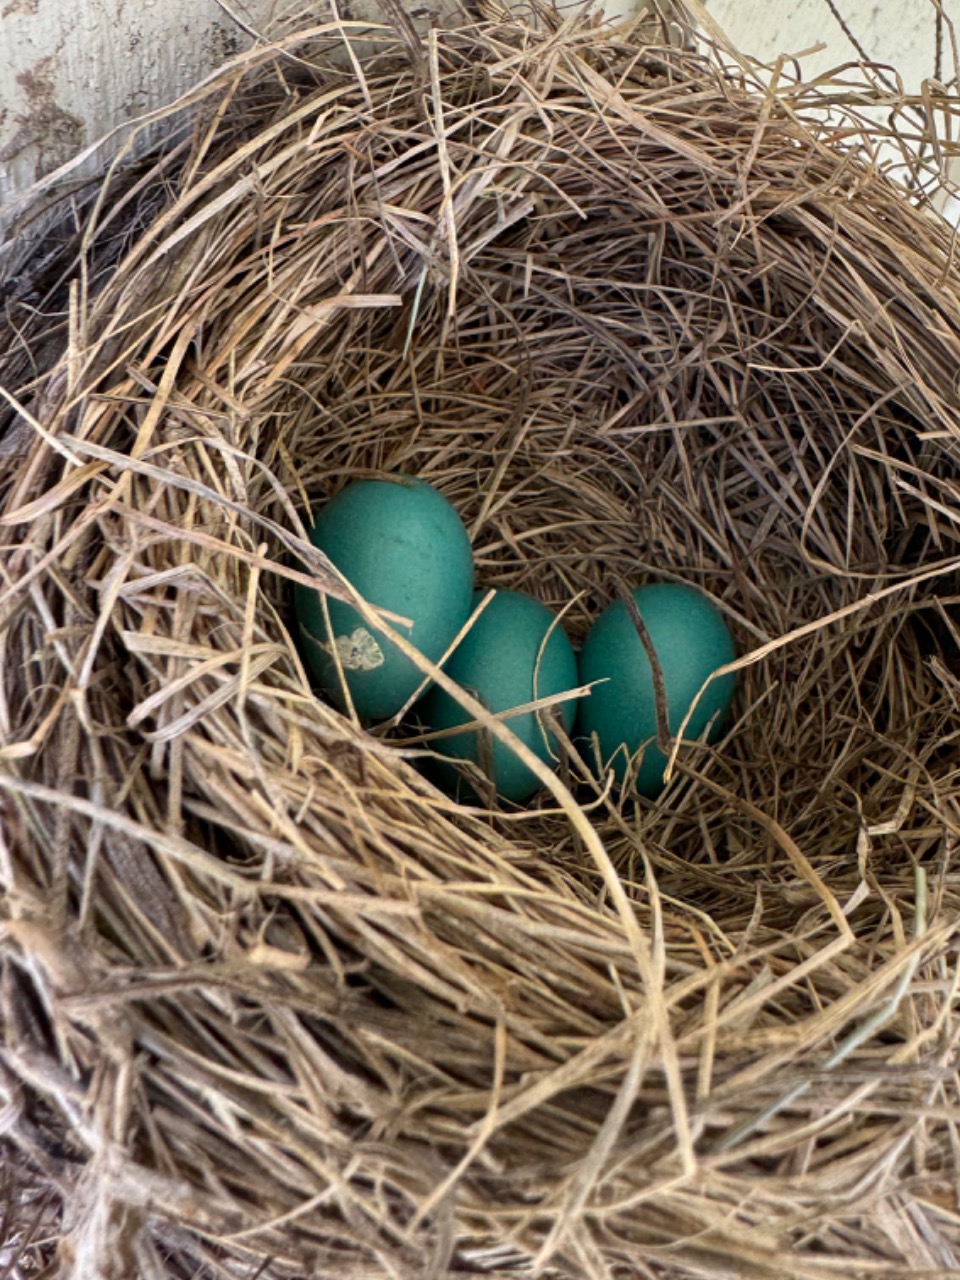 Three blue robin eggs in a brown nest, viewed from above